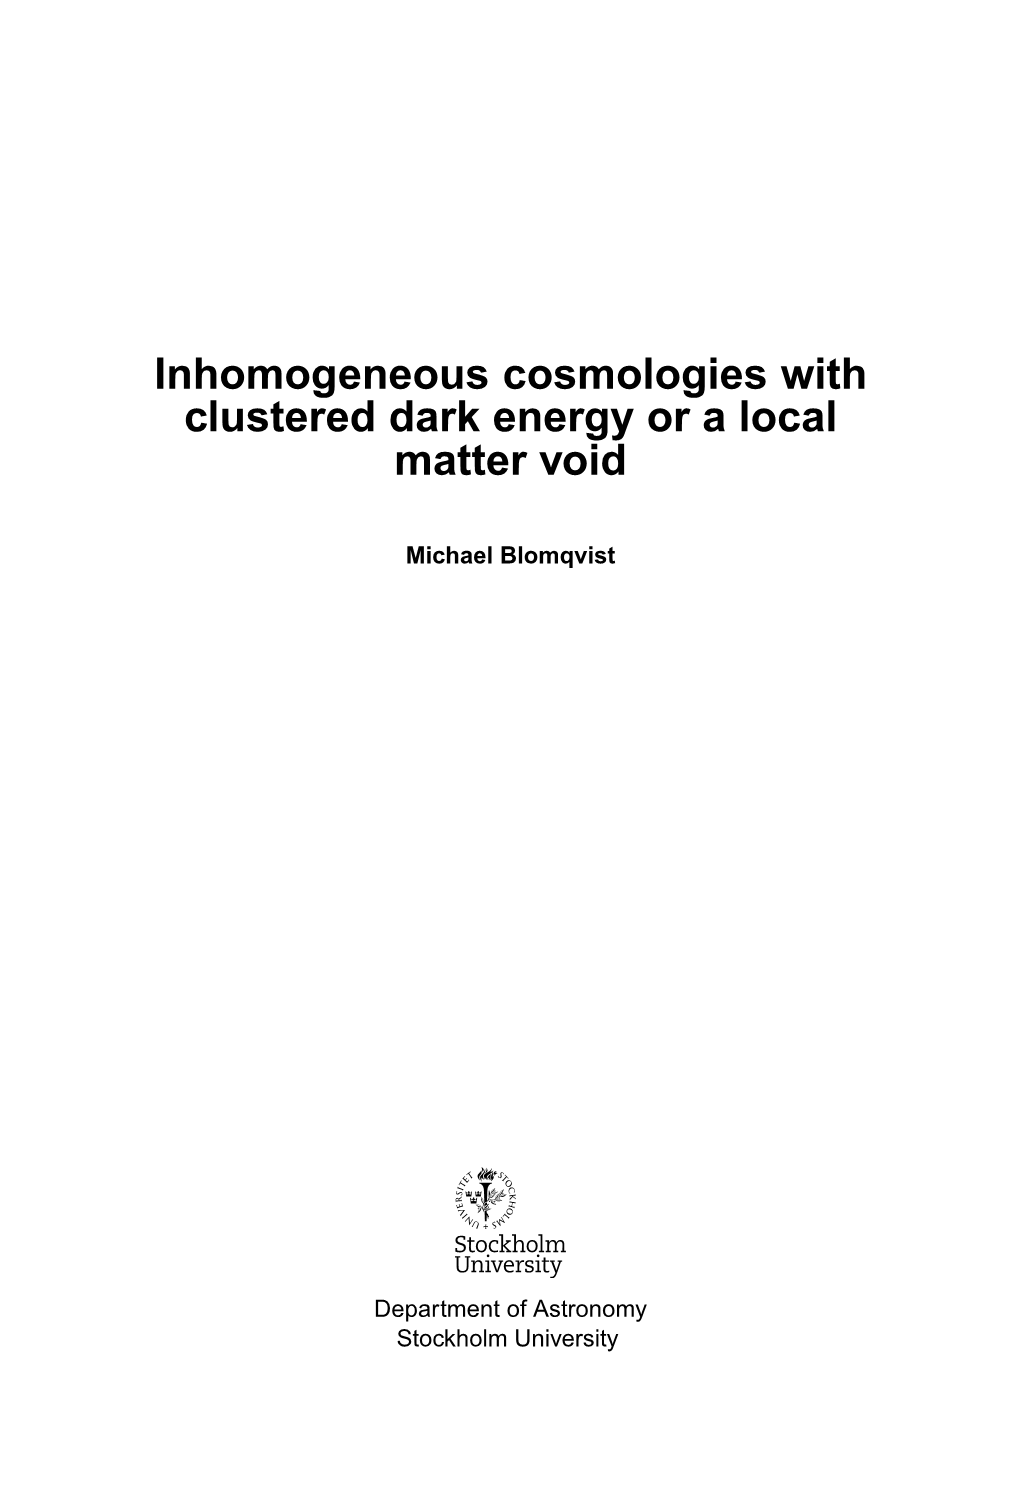 Inhomogeneous Cosmologies with Clustered Dark Energy Or a Local Matter Void